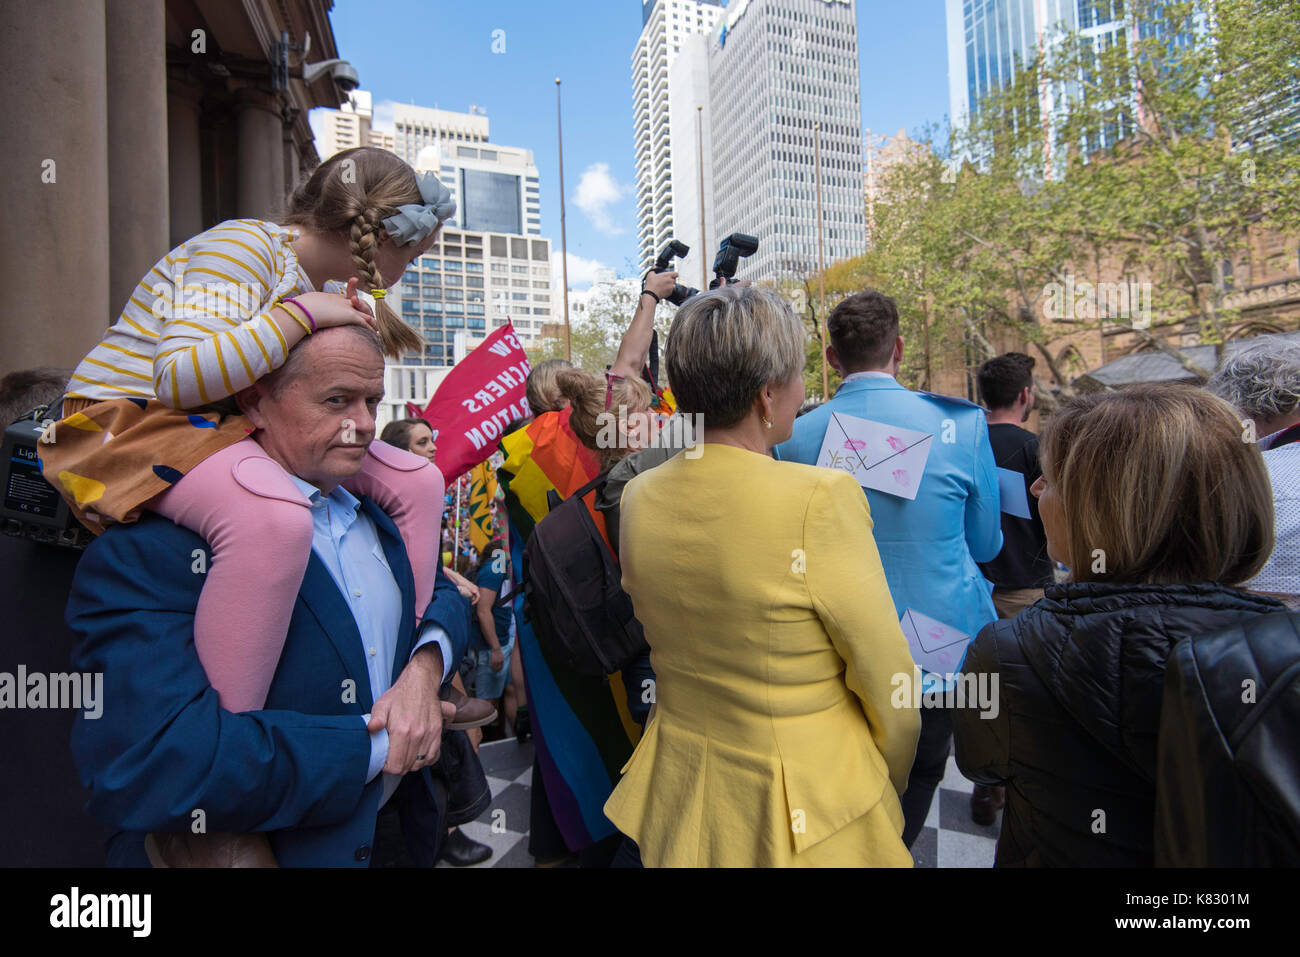 Federal Opposition Leader Mr Bill Shorten with daughter on his shoulders waits behind his deputy Tania Plebisec to speak at a marriage equality rally Stock Photo